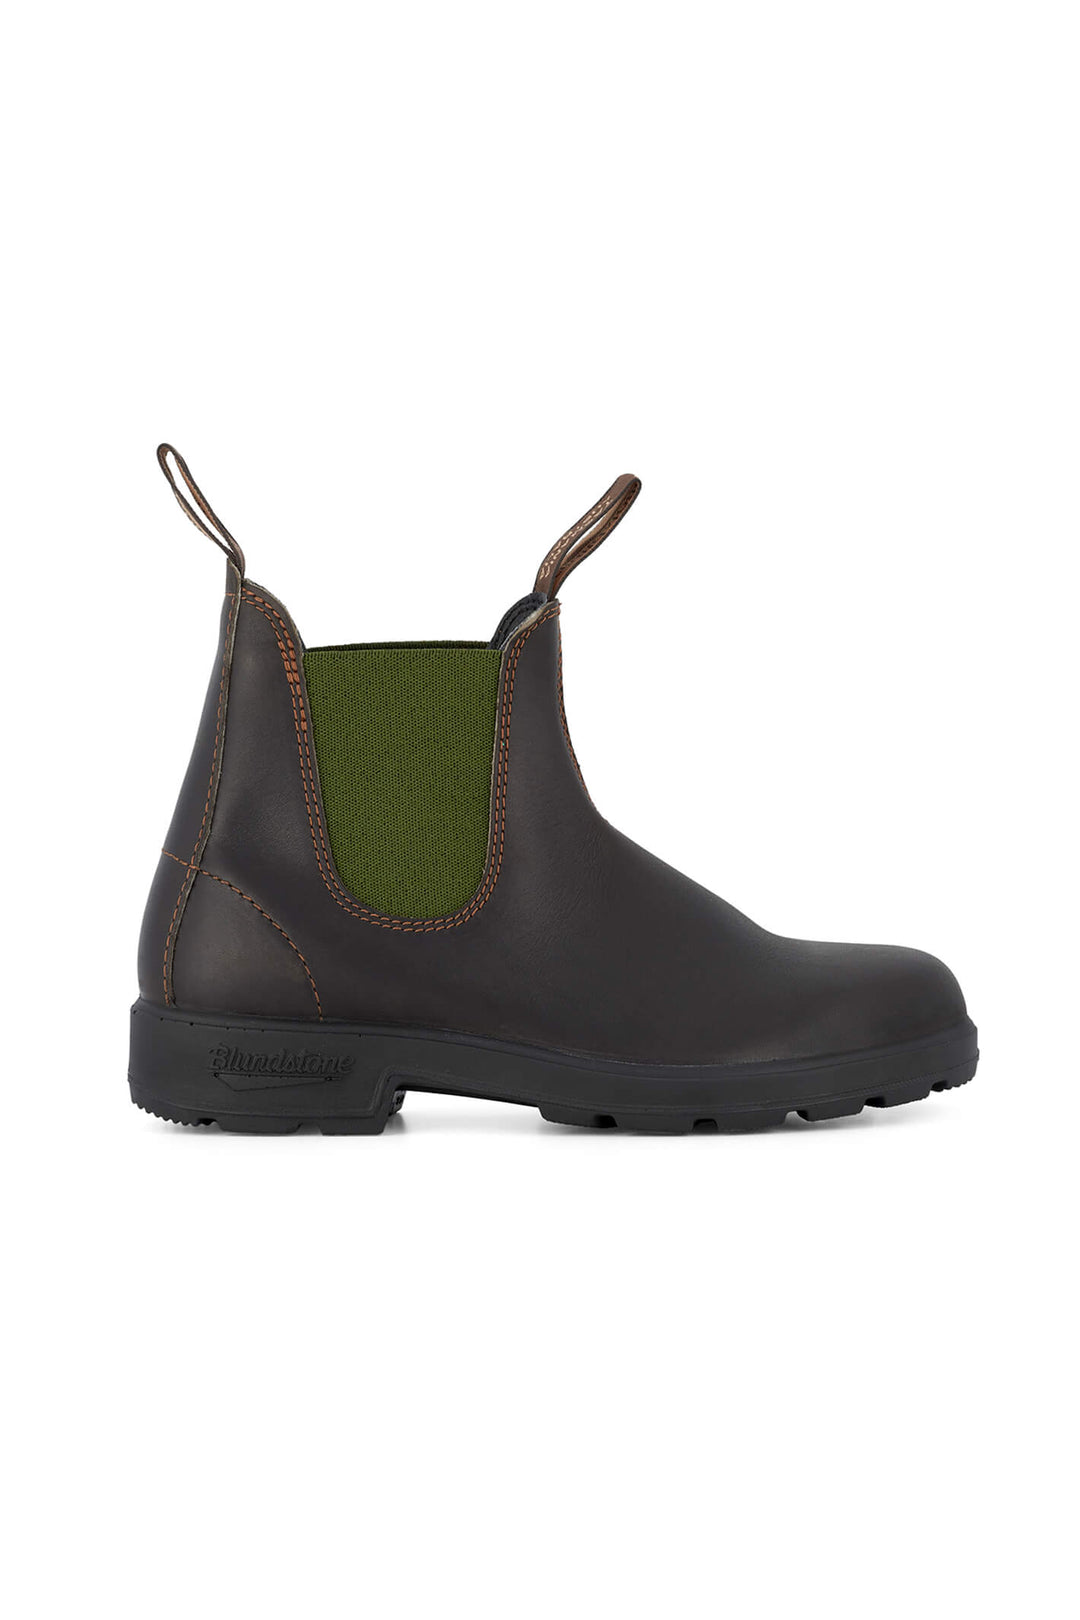 Blundstone 519 Stout Brown Leather with Olive Elastic Ankle Boots